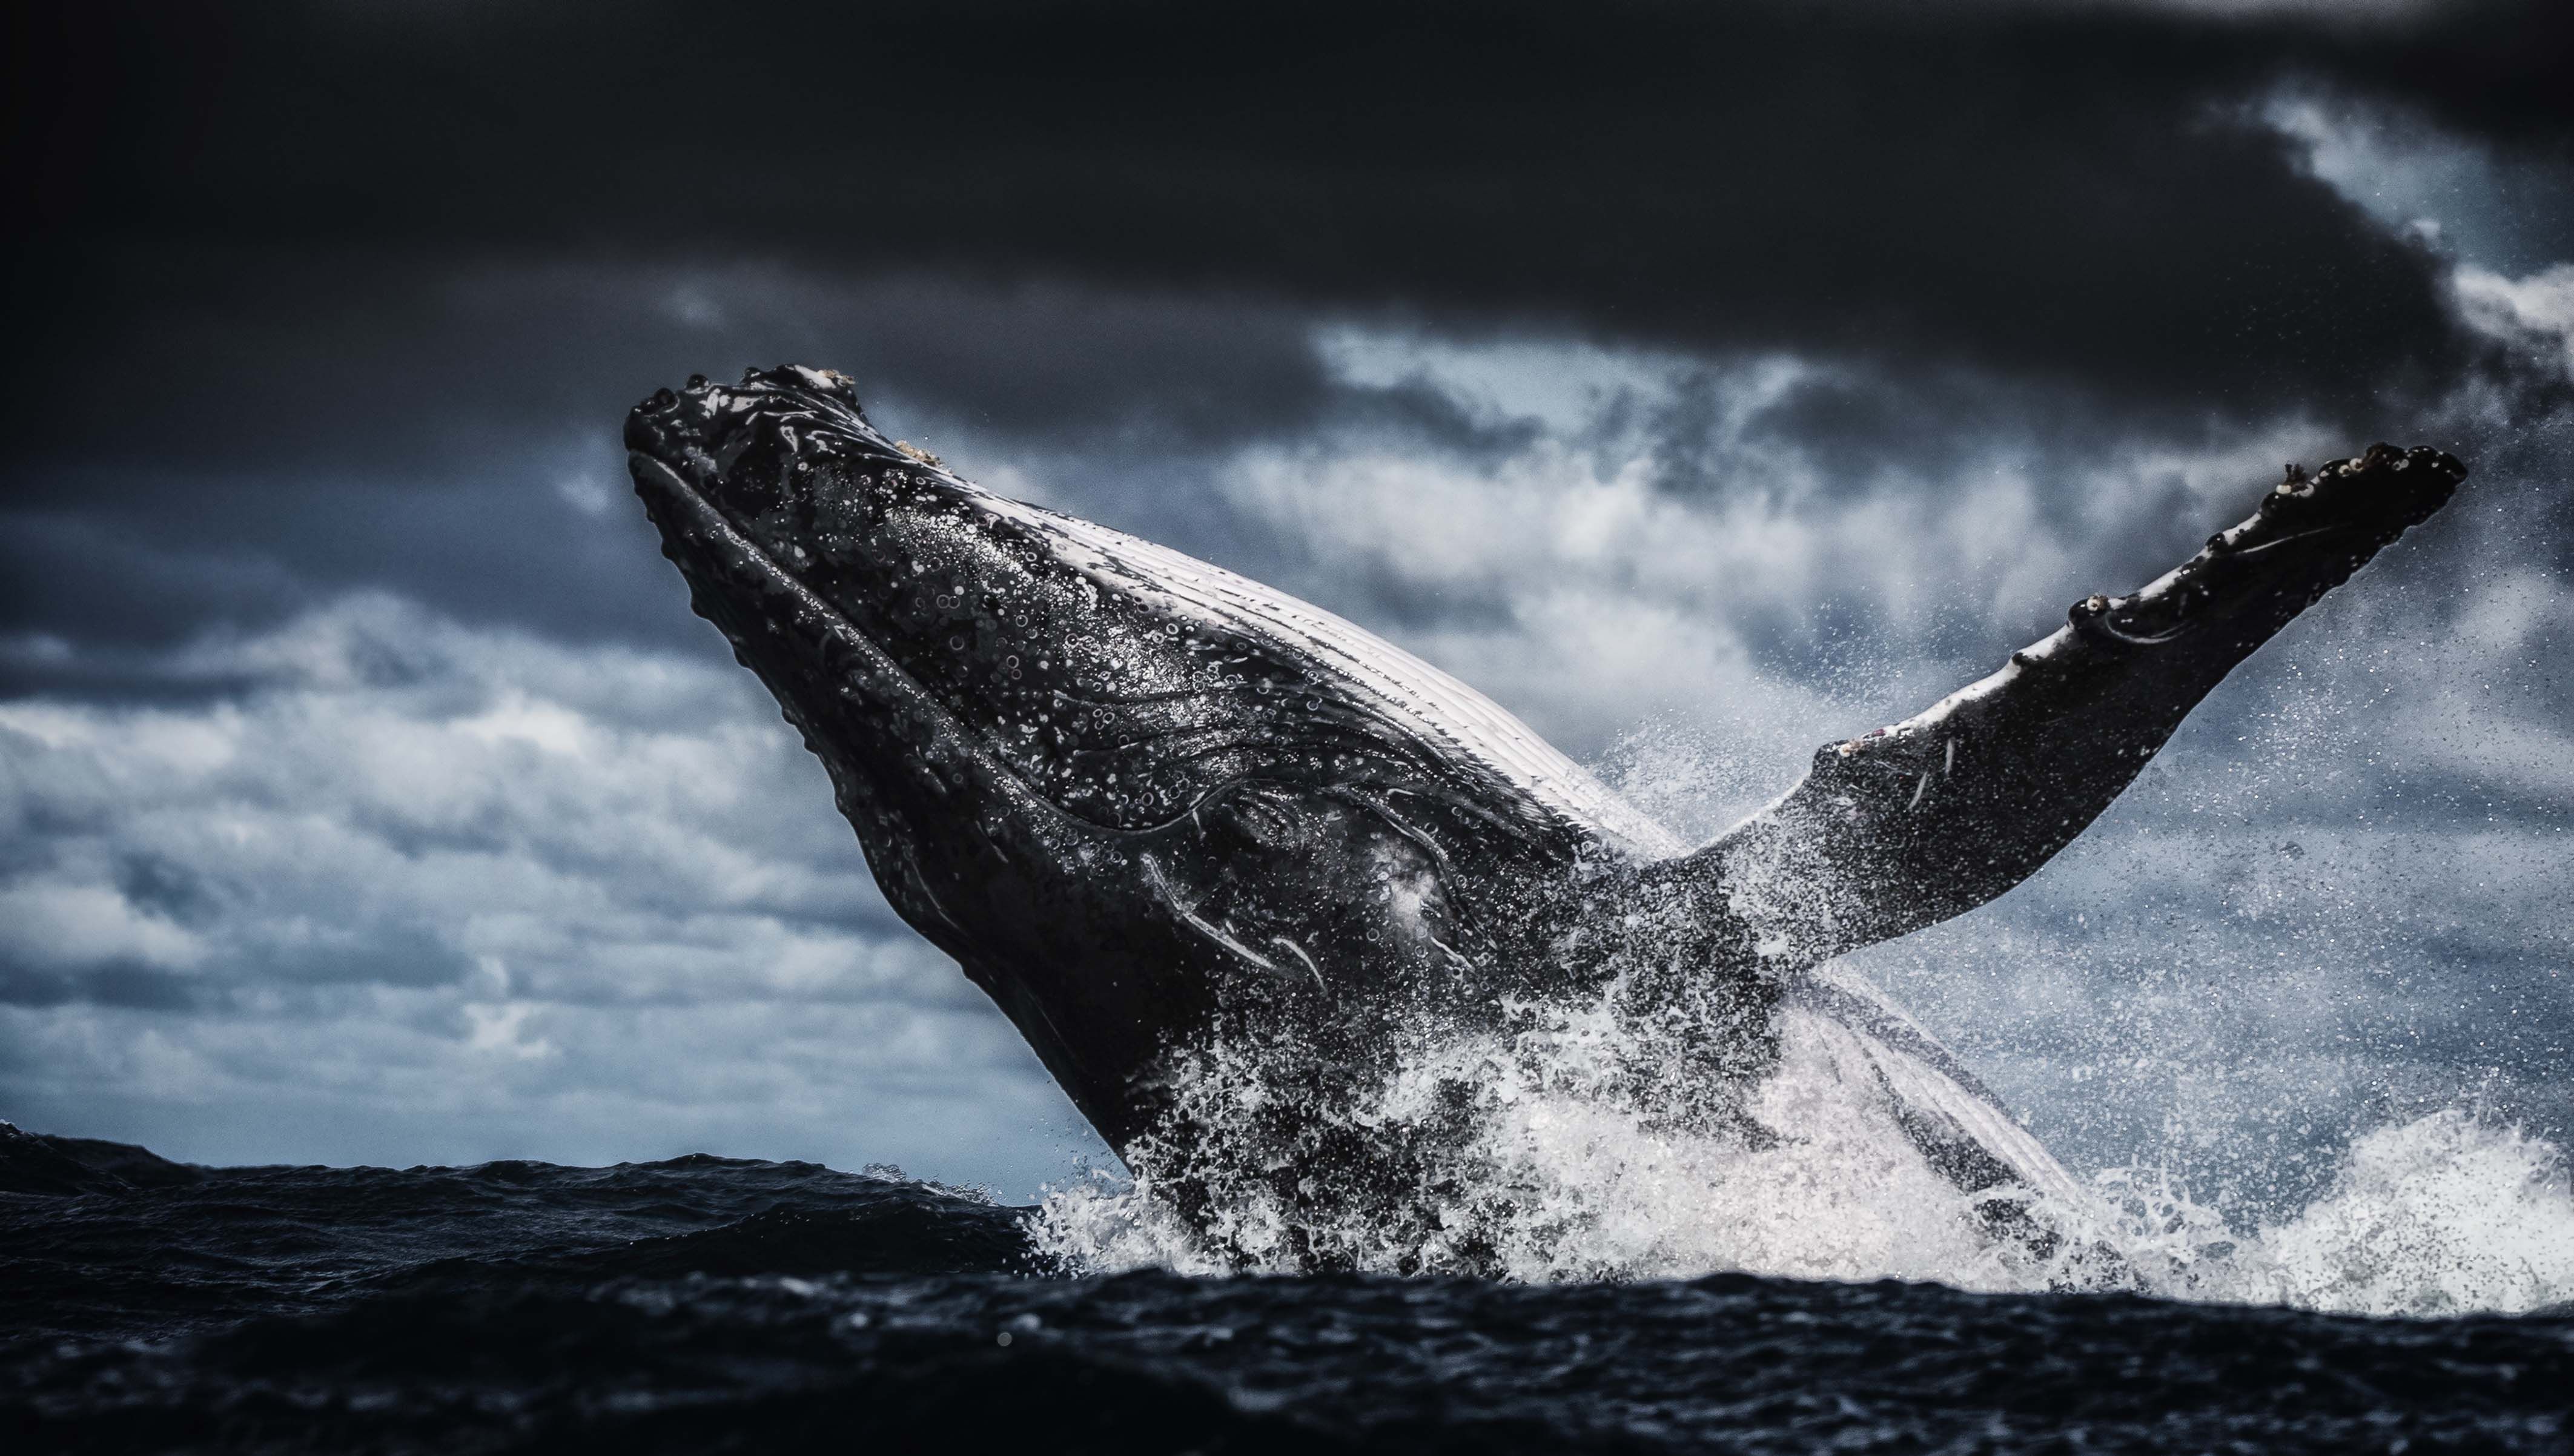 Humpback whale hd papers and backgrounds